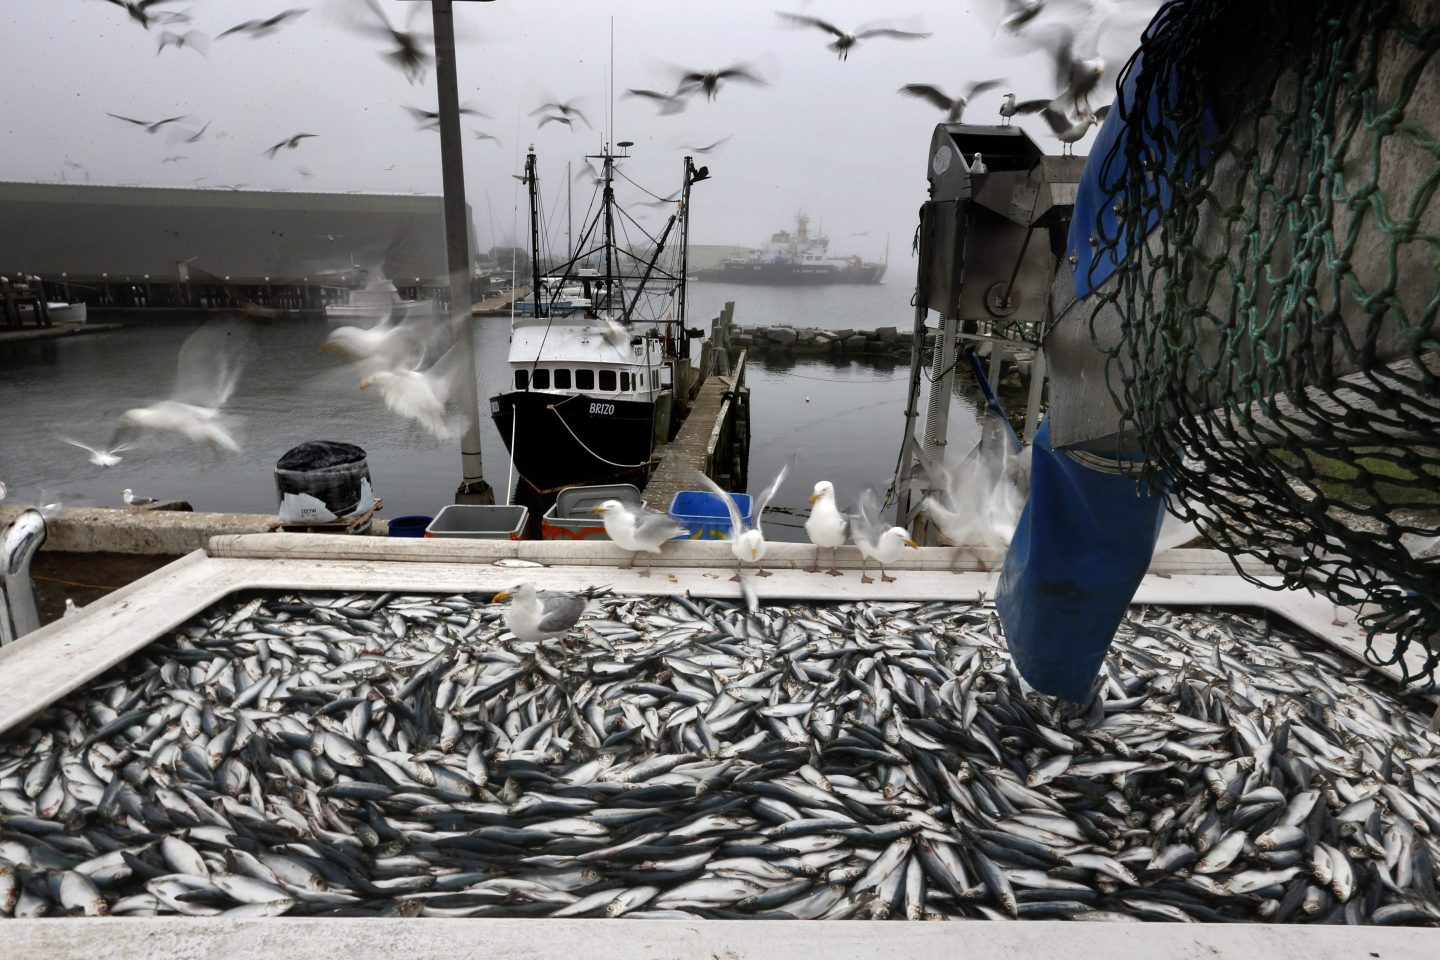 FILE - Herring are unloaded from a fishing boat in Rockland, Maine, July 8, 2015. Several commercial fishermen in New England have been sentenced in a fish fraud scheme described by prosecutors as complex and wide-ranging that centered on a critically important species of bait fish. The fishermen were sentenced last week for &quot;knowingly subverting commercial fishing reporting requirements&quot; in a scheme involving Atlantic herring, prosecutors said. (AP Photo/Robert F. Bukaty, File)